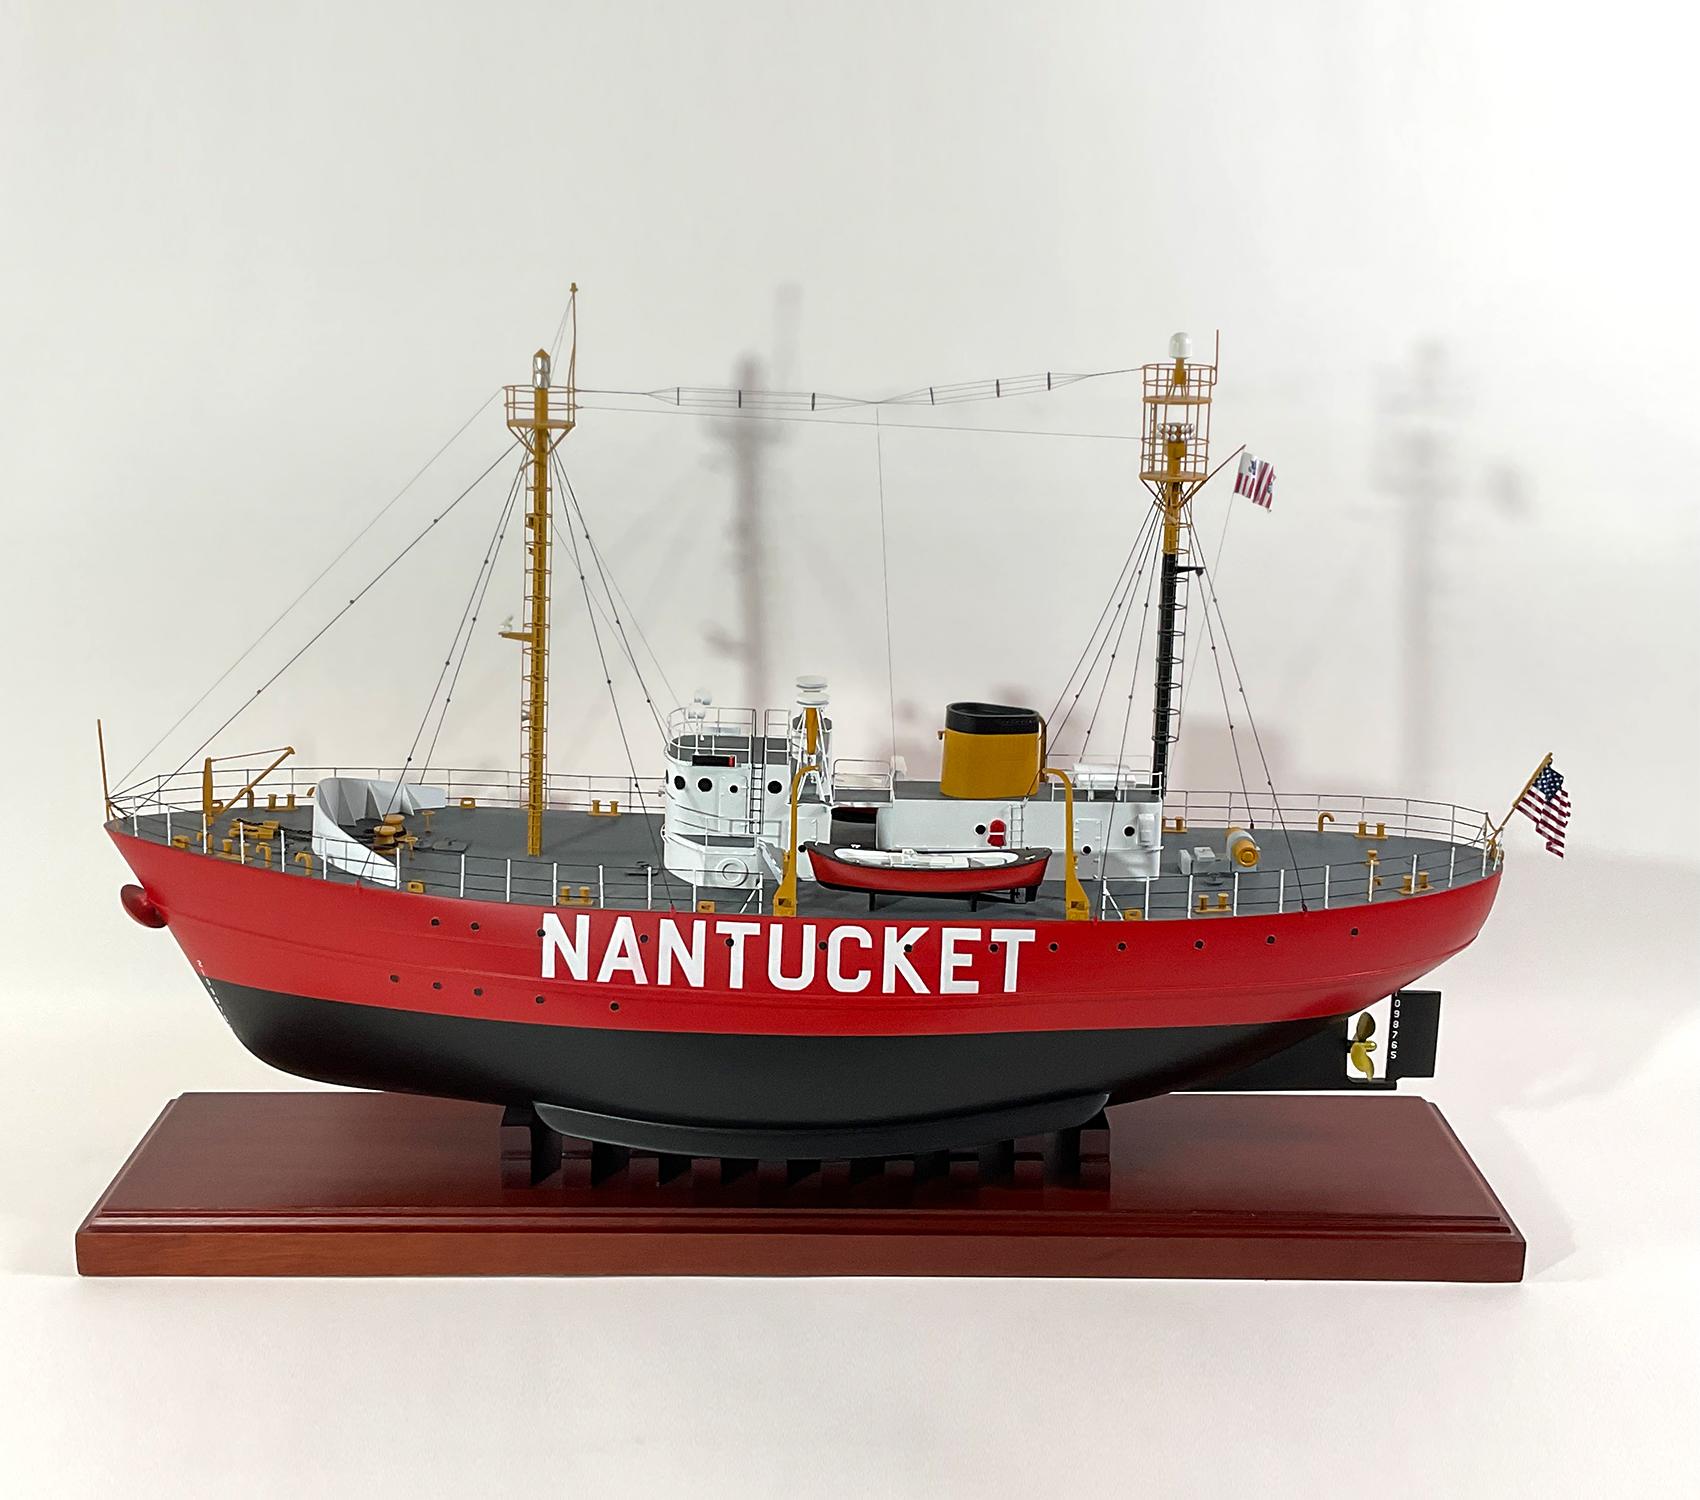 Scale model of the Nantucket lightship. This is the Lightship 612 that is now owned by Bill Golden. The model was professionally built for the person we acquired it from. Precisely detailed with doors, portholes, launches, railings, wheelhouse,